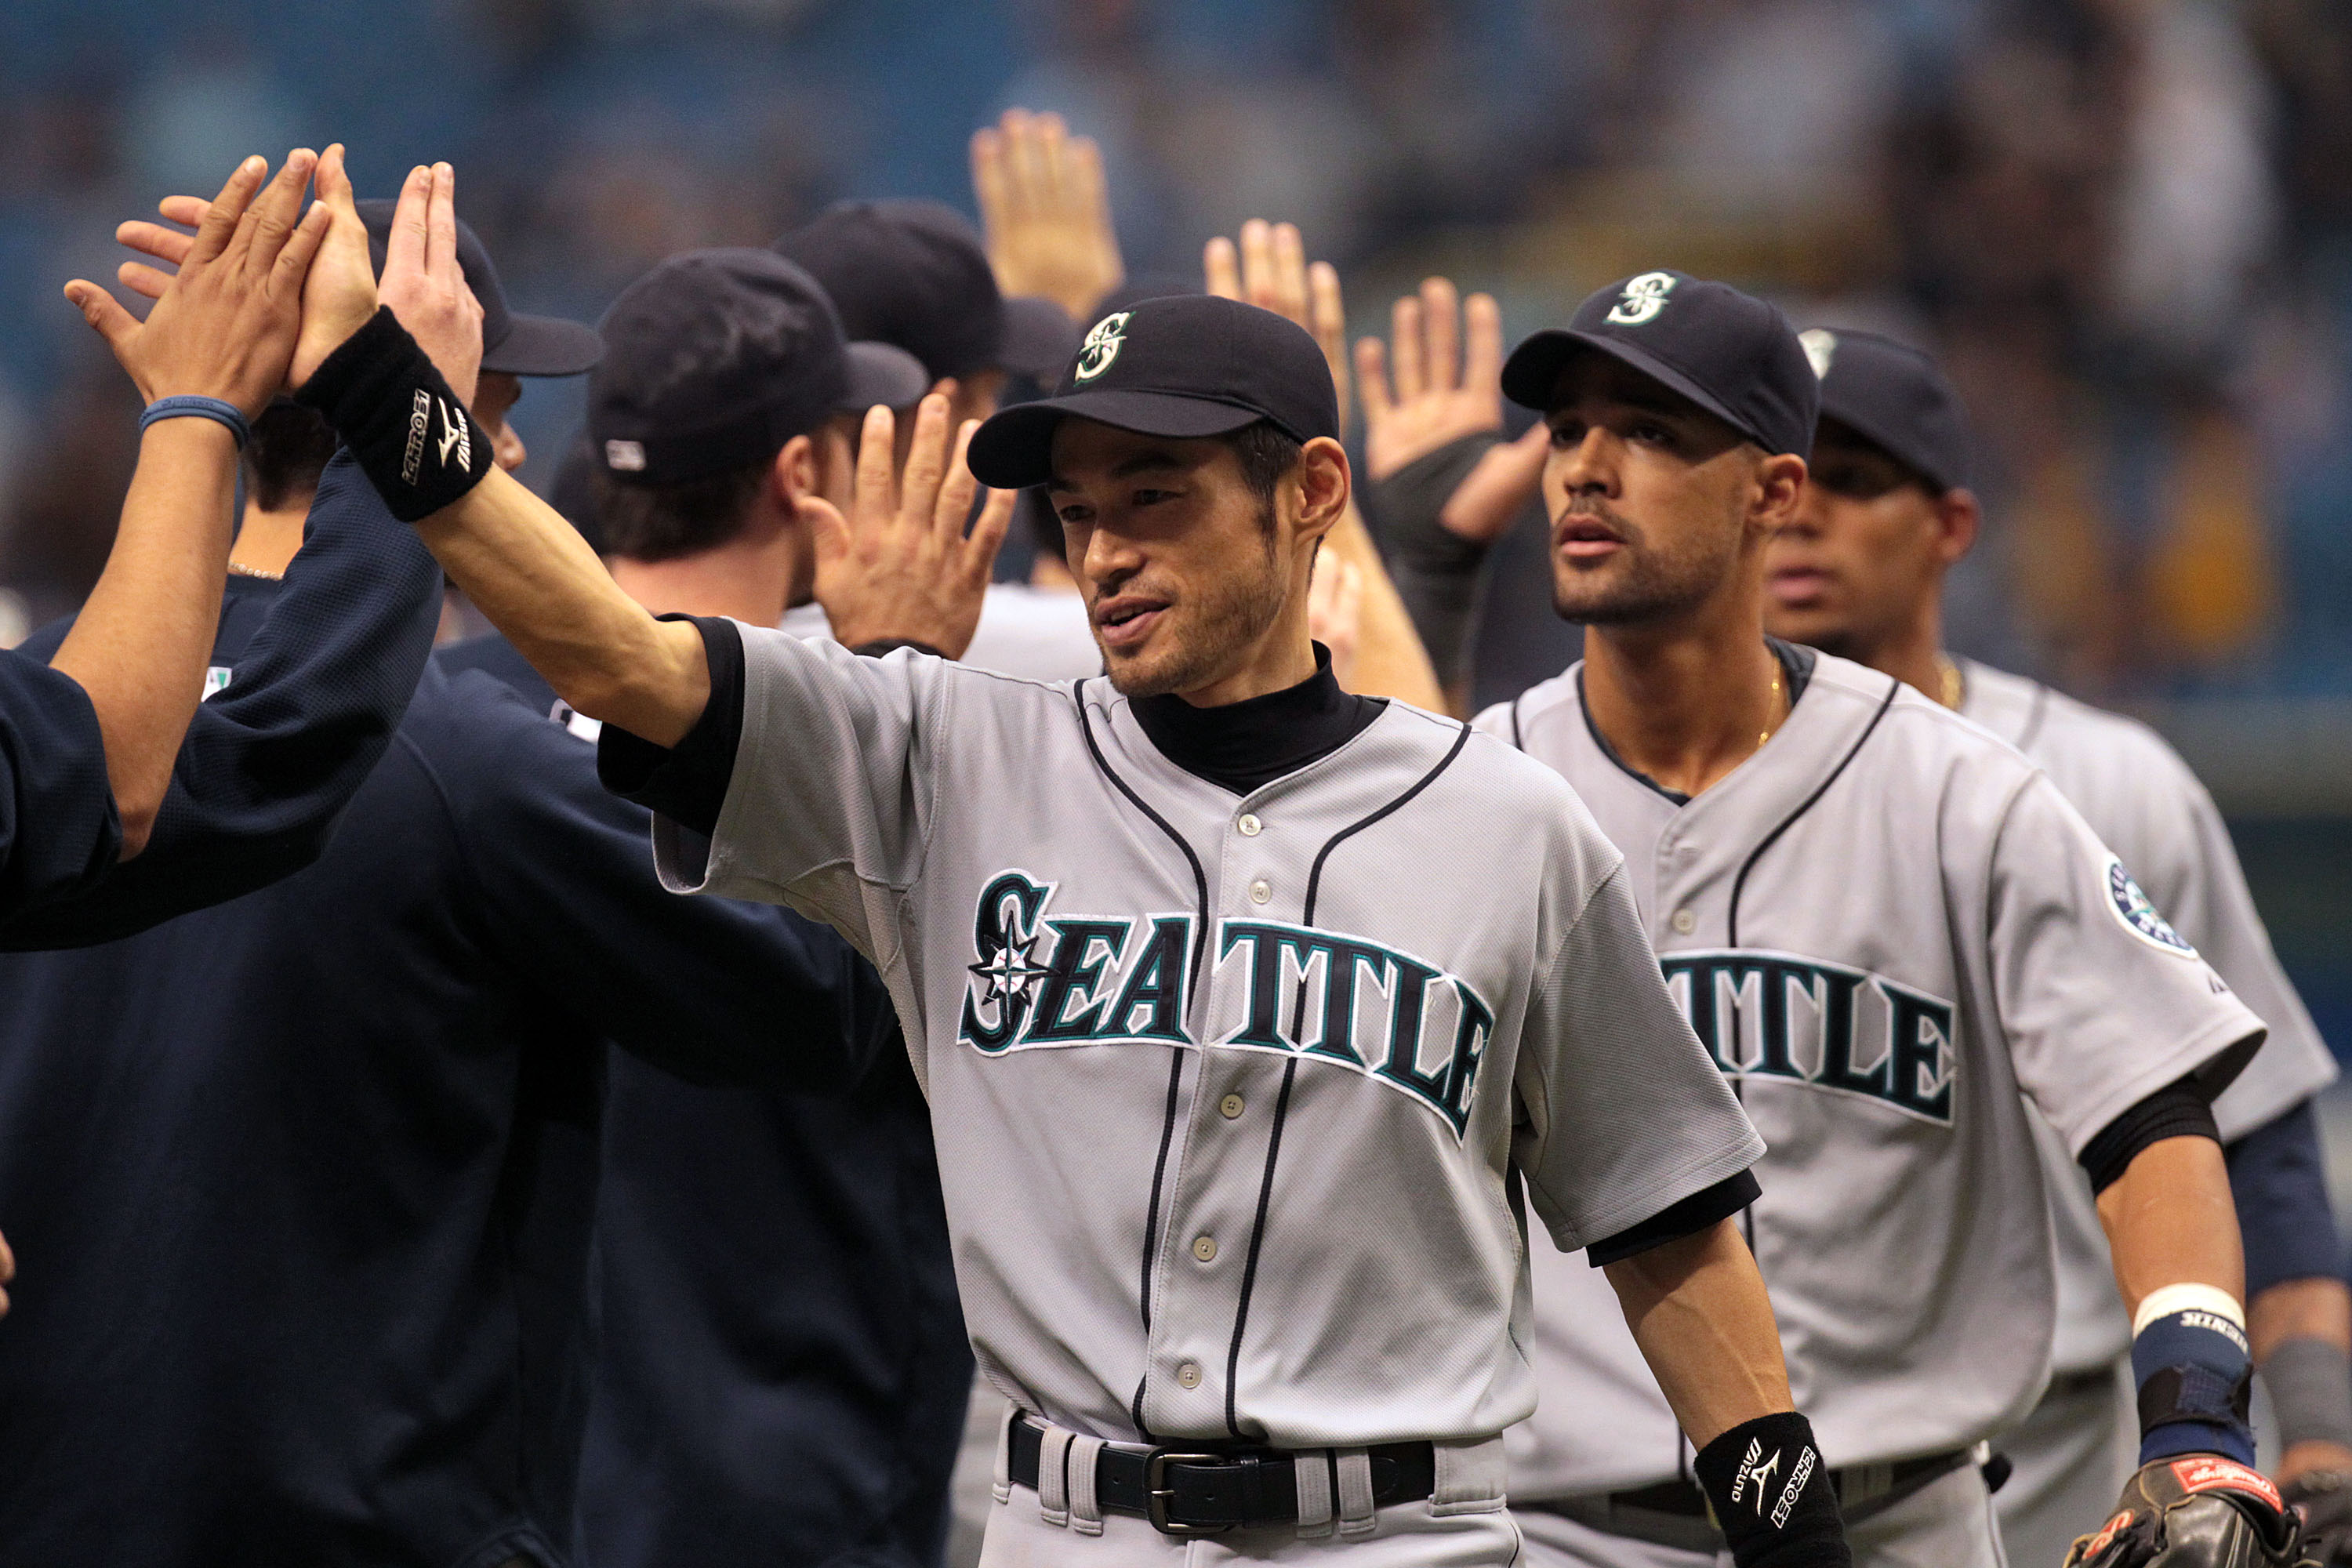 ST PETERSBURG, FL - SEPTEMBER 26: Ichiro Suzuki #51 of the Seattle Mariners celebrates a 6-2 win with teammates against the Tampa Bay Rays at Tropicana Field on September 26, 2010 in St. Petersburg, Florida. (Photo by Eliot J. Schechter/Getty Images)